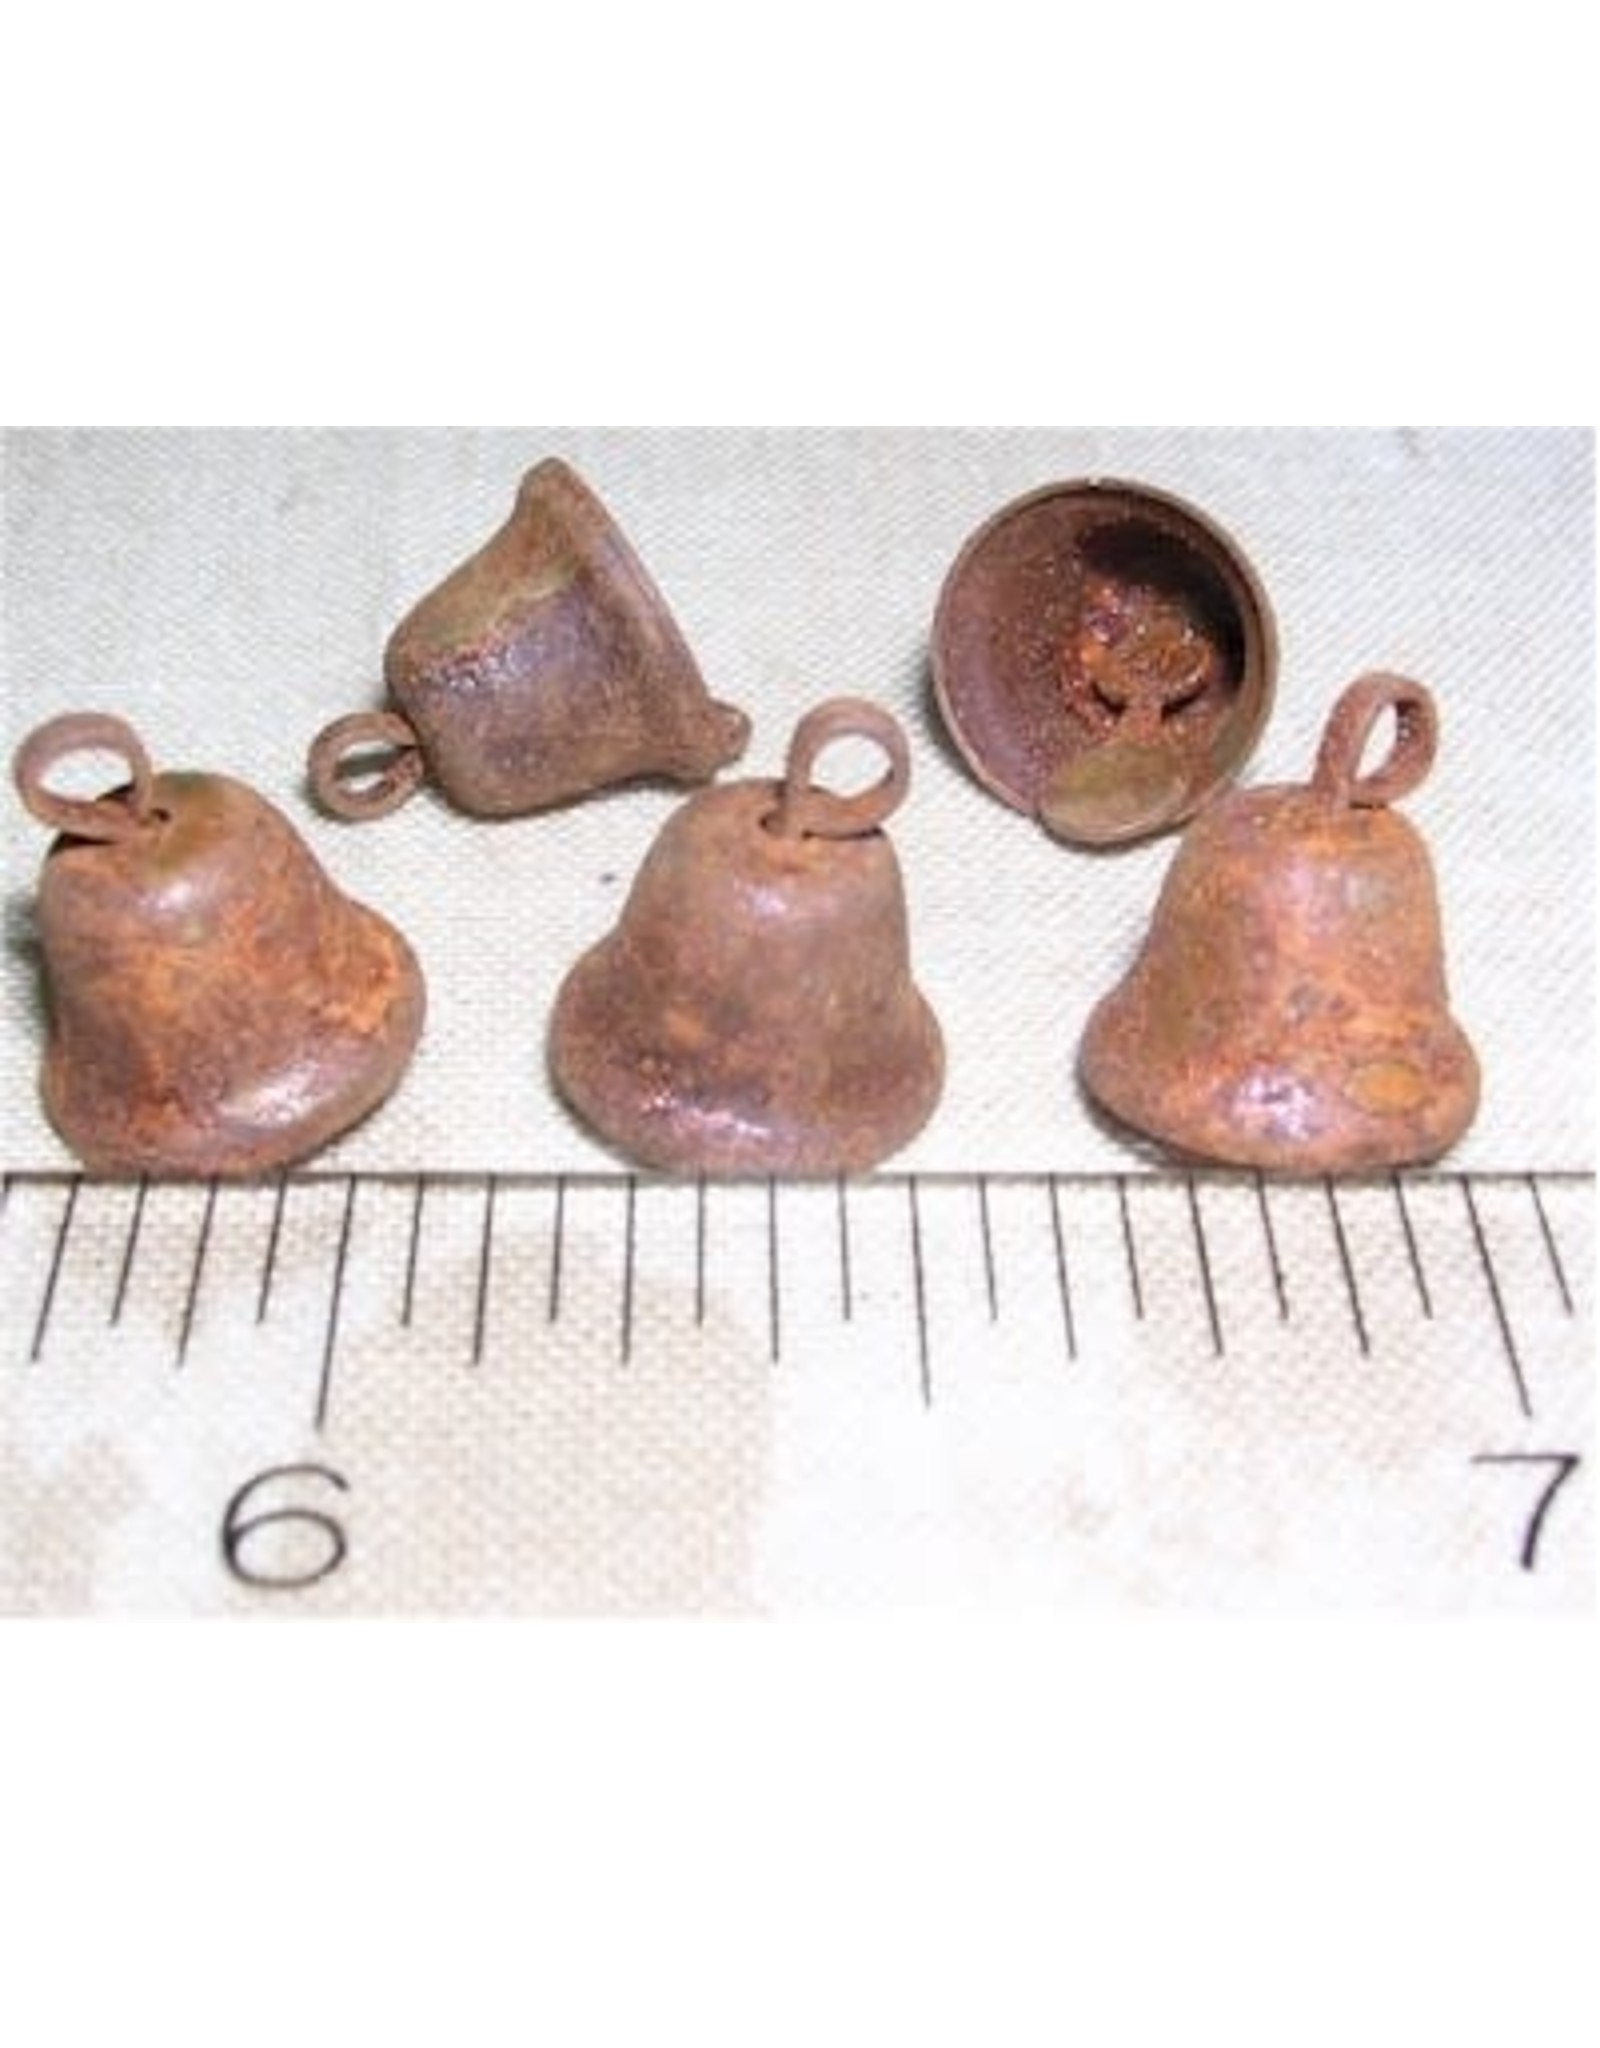 RUSTY LIBERTY BELLS 3/8 " PACKAGED 36